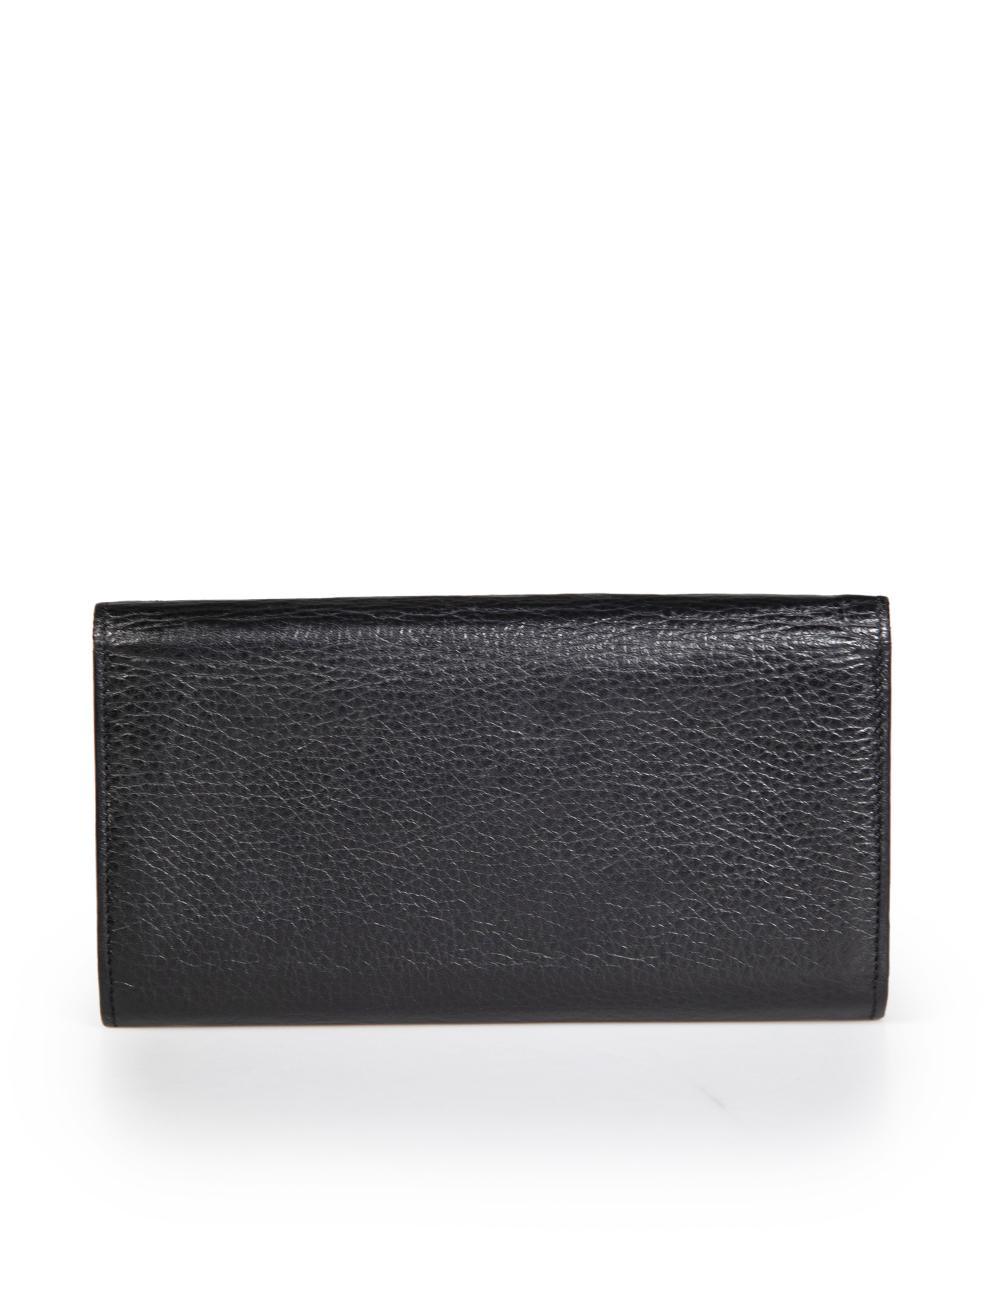 Tom Ford Black Leather TF Logo Continental Wallet In Excellent Condition For Sale In London, GB